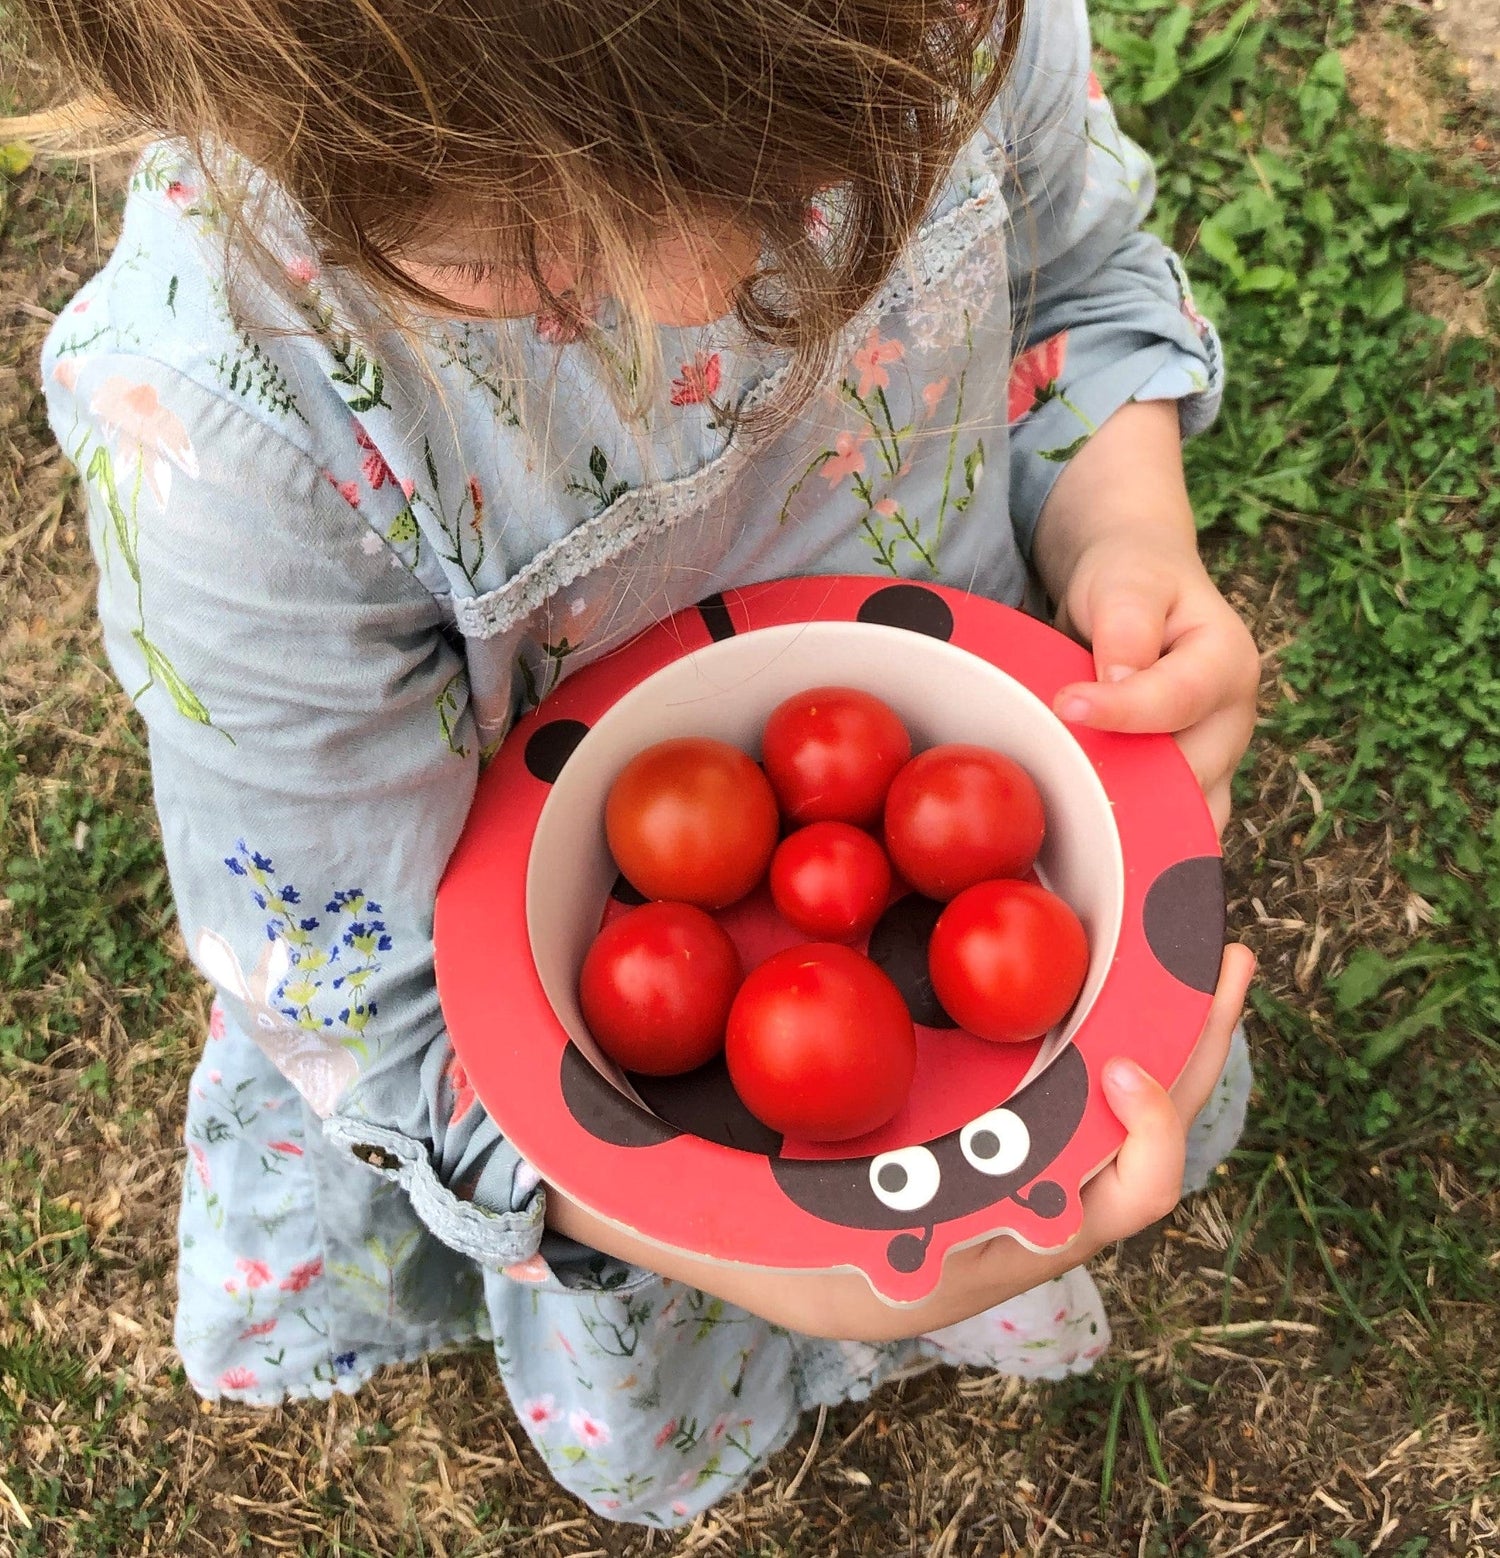 About Gardening For Kids